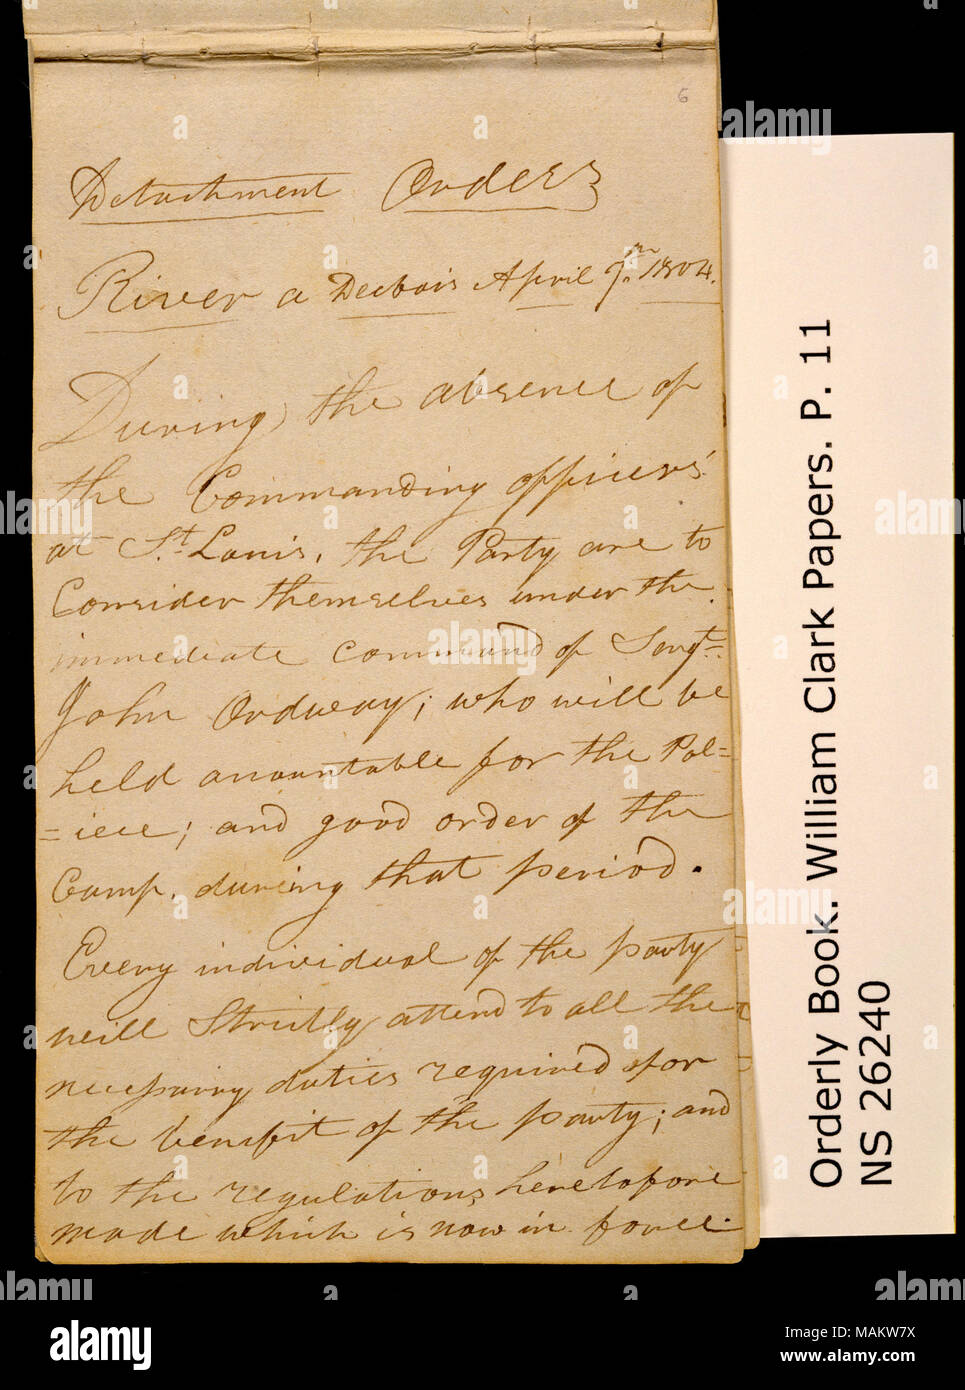 'Detachment Orders. Camp River Dubois, April 7th 1804.' Title: Clark Family Collection: Volume 20. Orderly book, page 11, April 7, 1804  . 7 April 1804. Clark, William, 1770-1838 Stock Photo